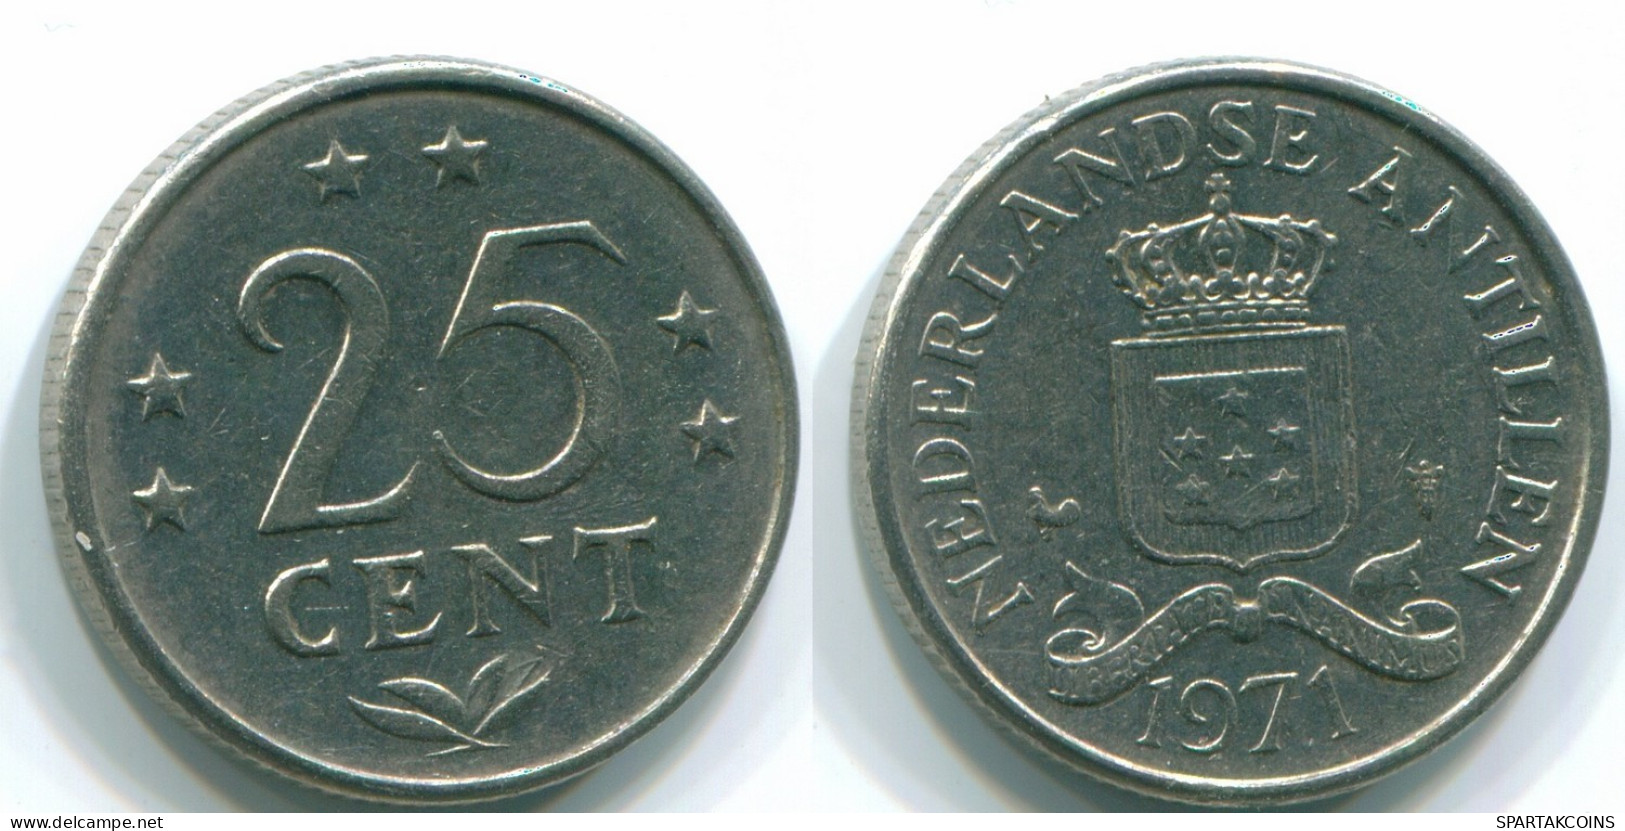 25 CENTS 1971 NETHERLANDS ANTILLES Nickel Colonial Coin #S11564.U.A - Netherlands Antilles